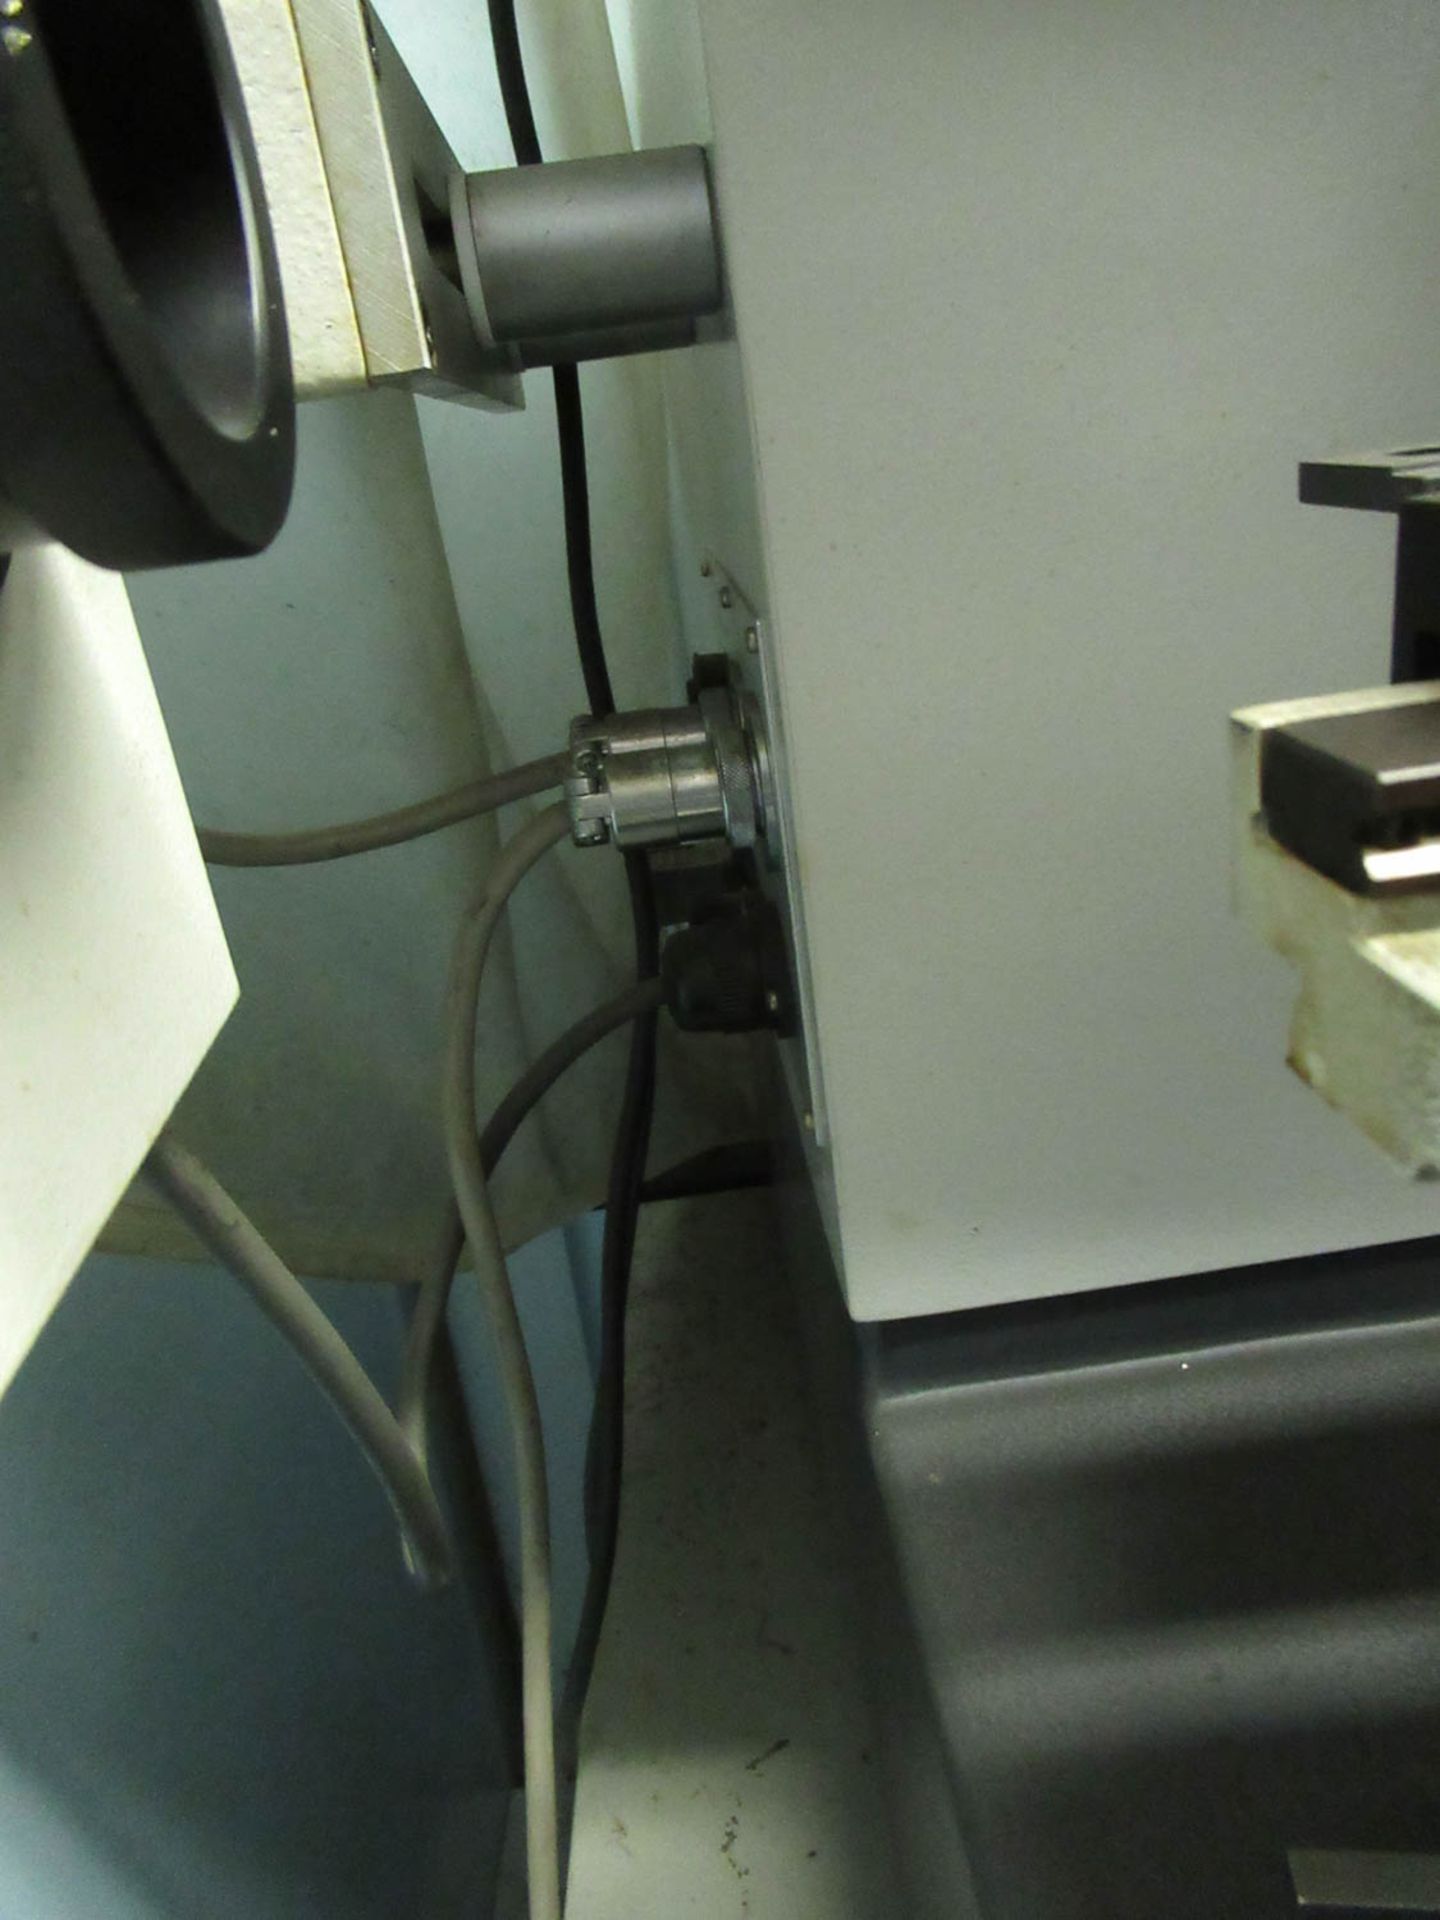 13" MITUTOYO PH-350 COMPARATOR, SURFACE ILLUMINATION, 5-7/8" X 15-3/4" TABLE, MITUTOYO 2-AXIS - Image 3 of 6